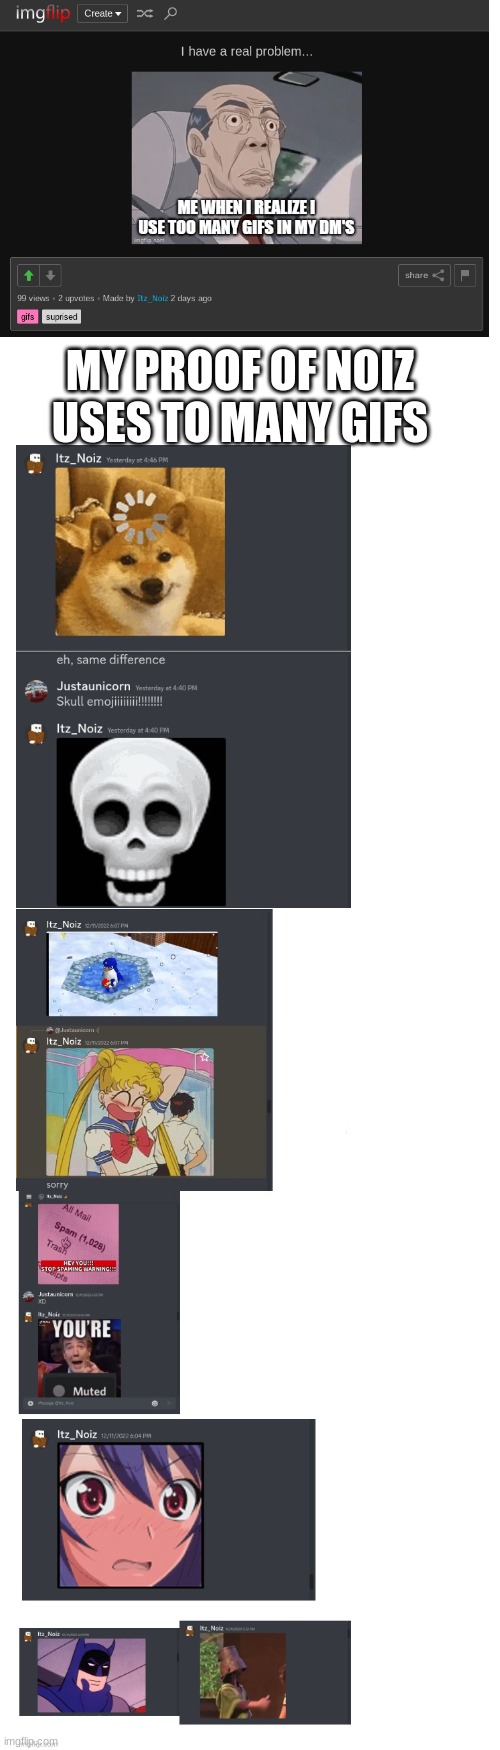 My Proof that my online friend uses to many gifs on his dms (feat Noiz himself lol) | MY PROOF OF NOIZ USES TO MANY GIFS | image tagged in discord,itz_noiz,gifs,dms,bffs,idk how many gifs he sent me today lol | made w/ Imgflip meme maker